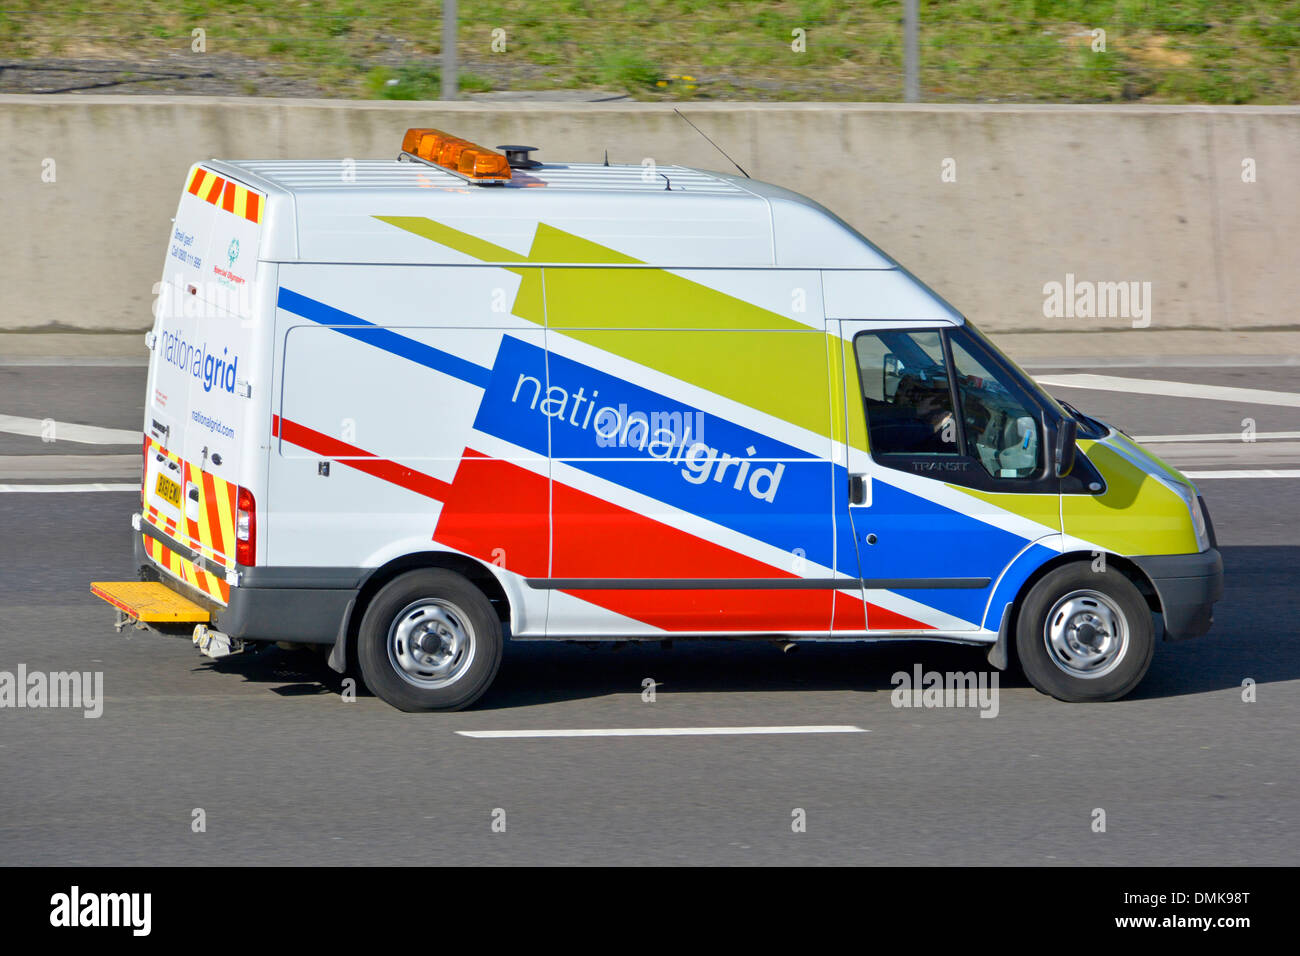 Side view Ford Transit van driver in commercial vehicle operated by the National Grid driving along m25 motorway road Essex England UK Stock Photo